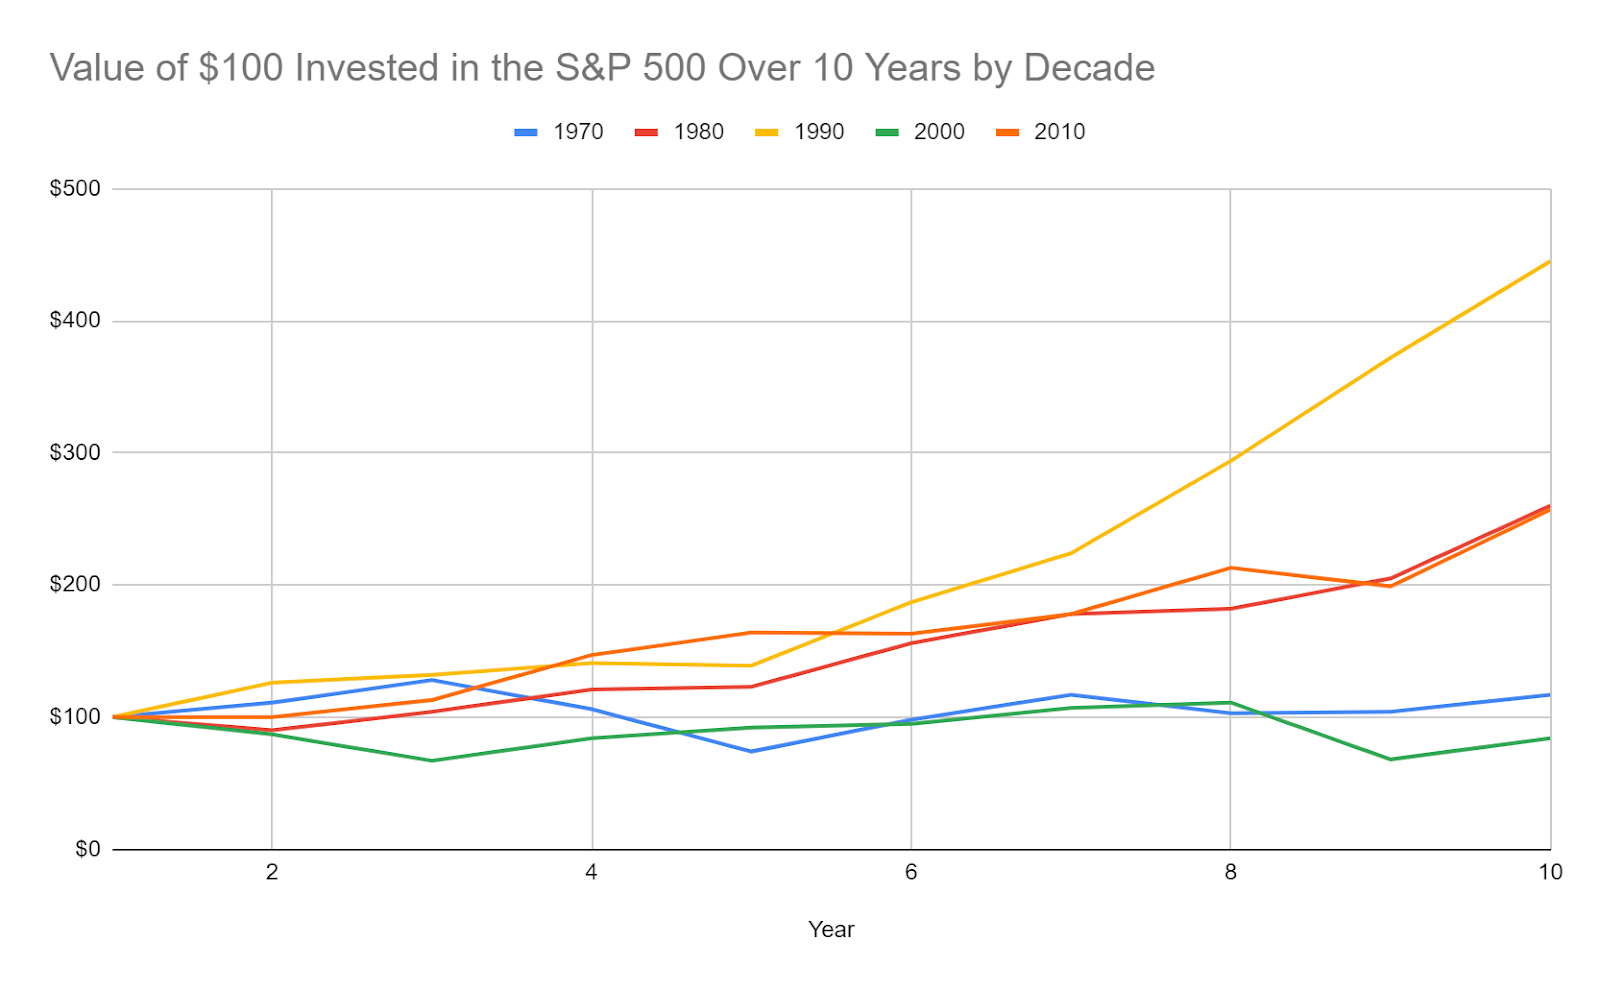 Value of $100 invested in the S&P 500 over 10 years by decade - understanding a good rate of return on a 401(k)